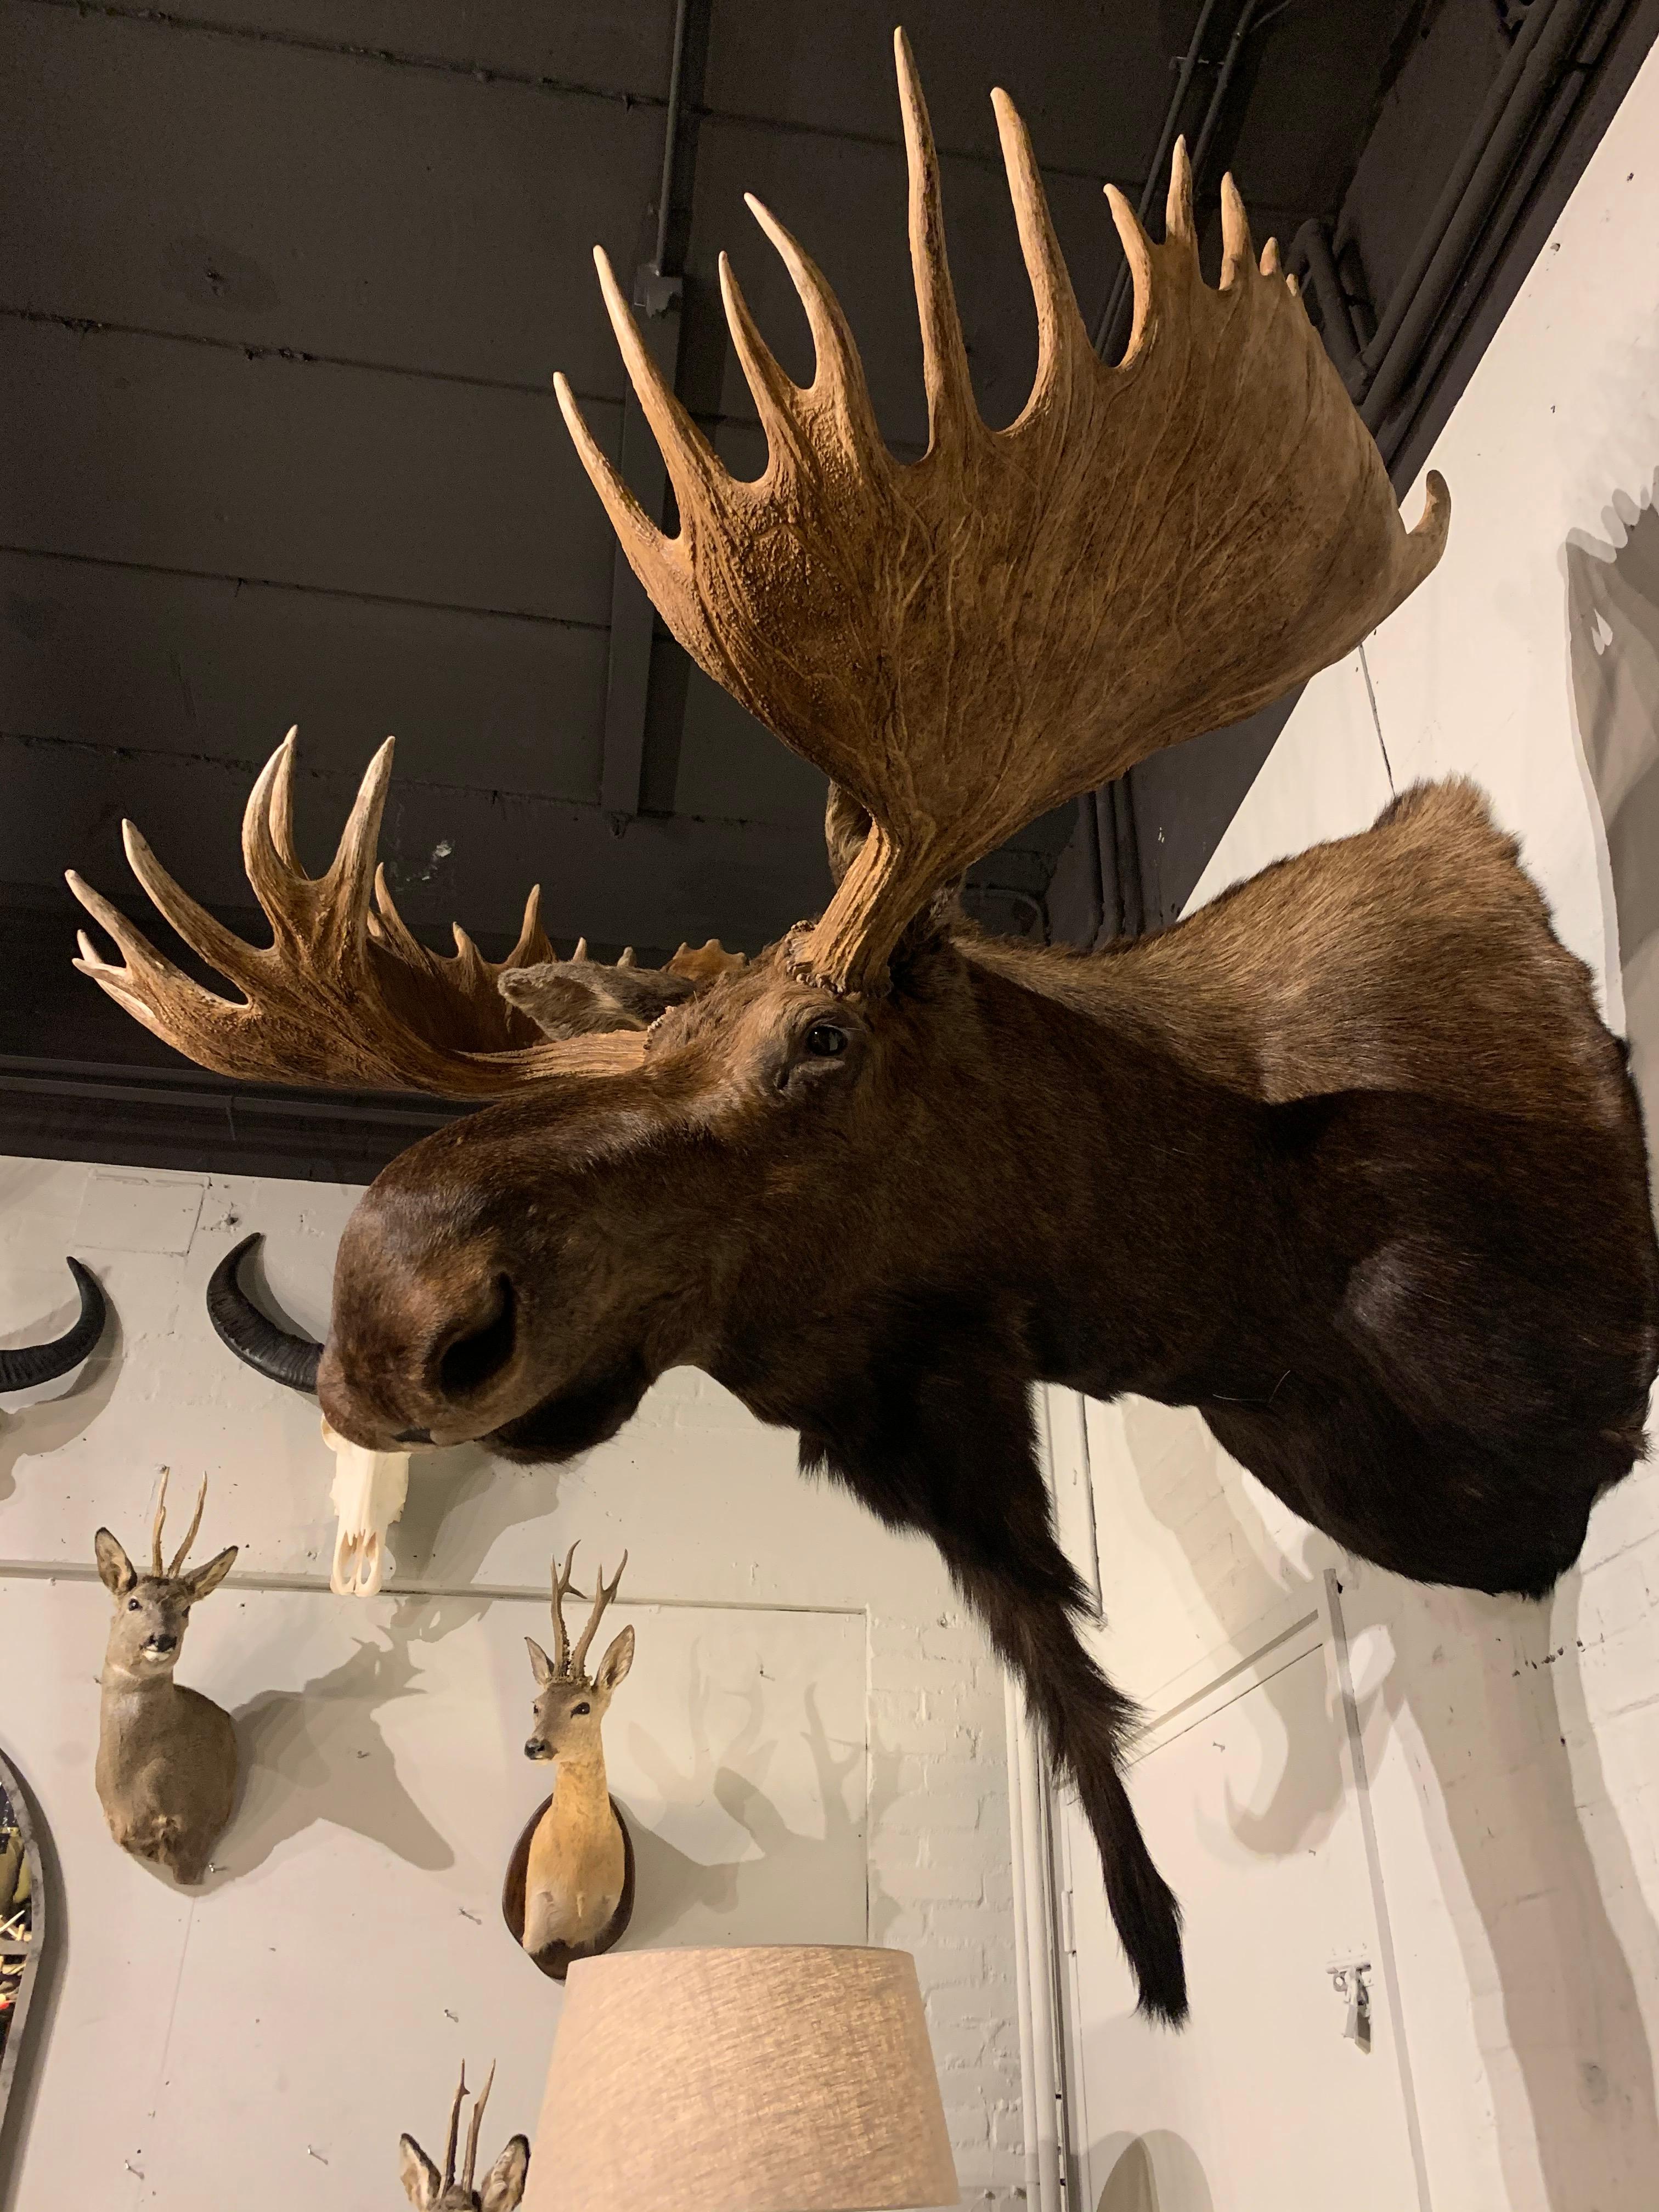 Enormous shoulder mount of a Canadian moose. This head is made very life like and whit great attention for detail. Perfect eye catcher for an alpine chalet.
It is the biggest moose we ever had in our collection.
 